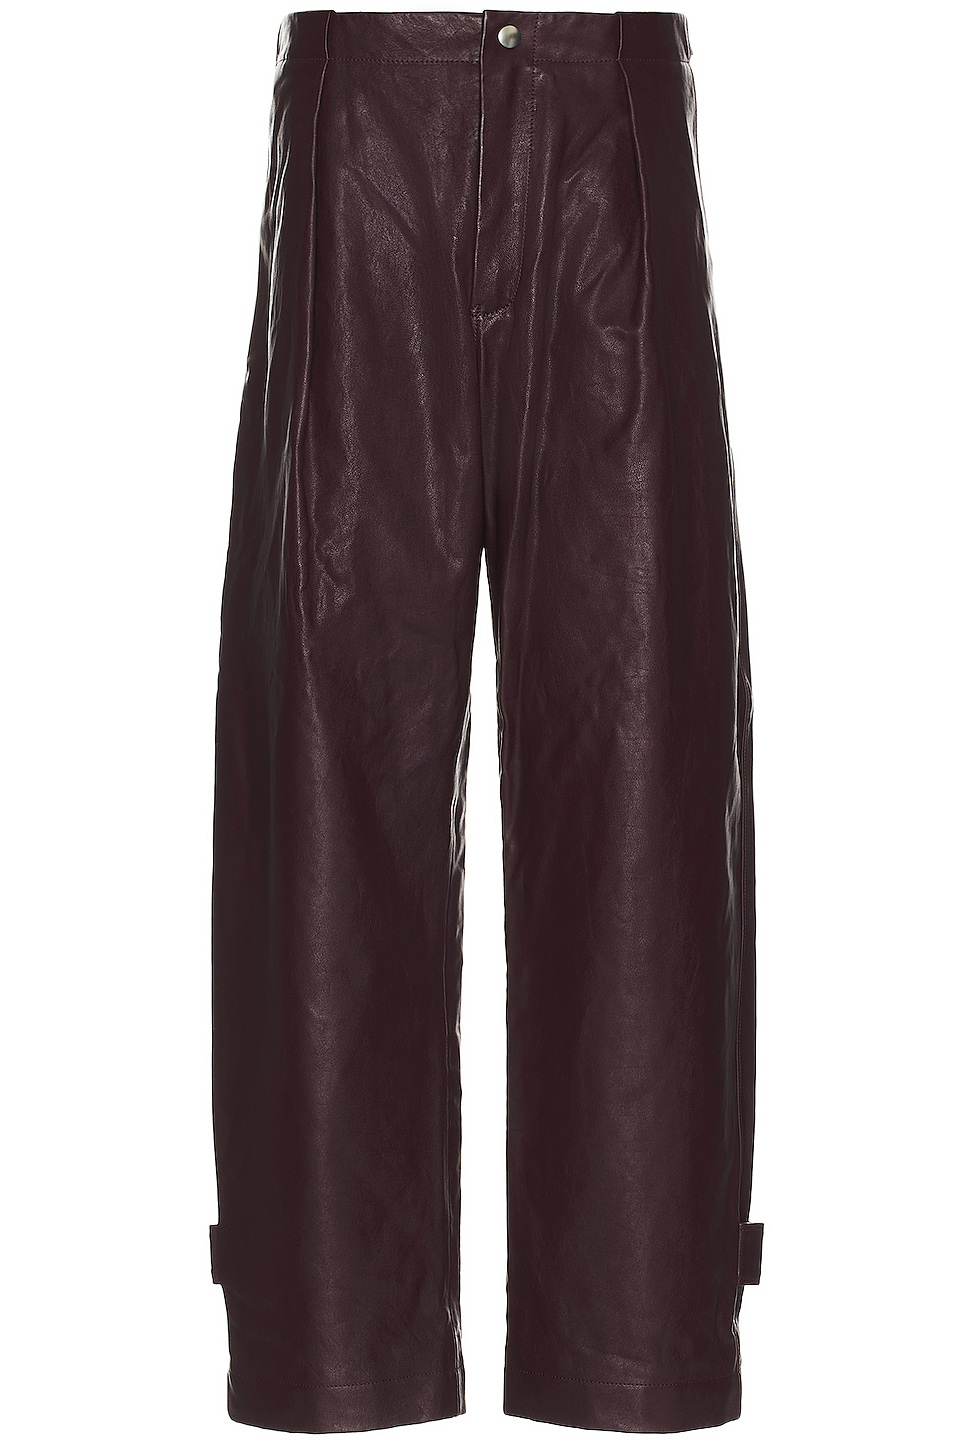 Image 1 of Burberry Leather Trouser in Plum